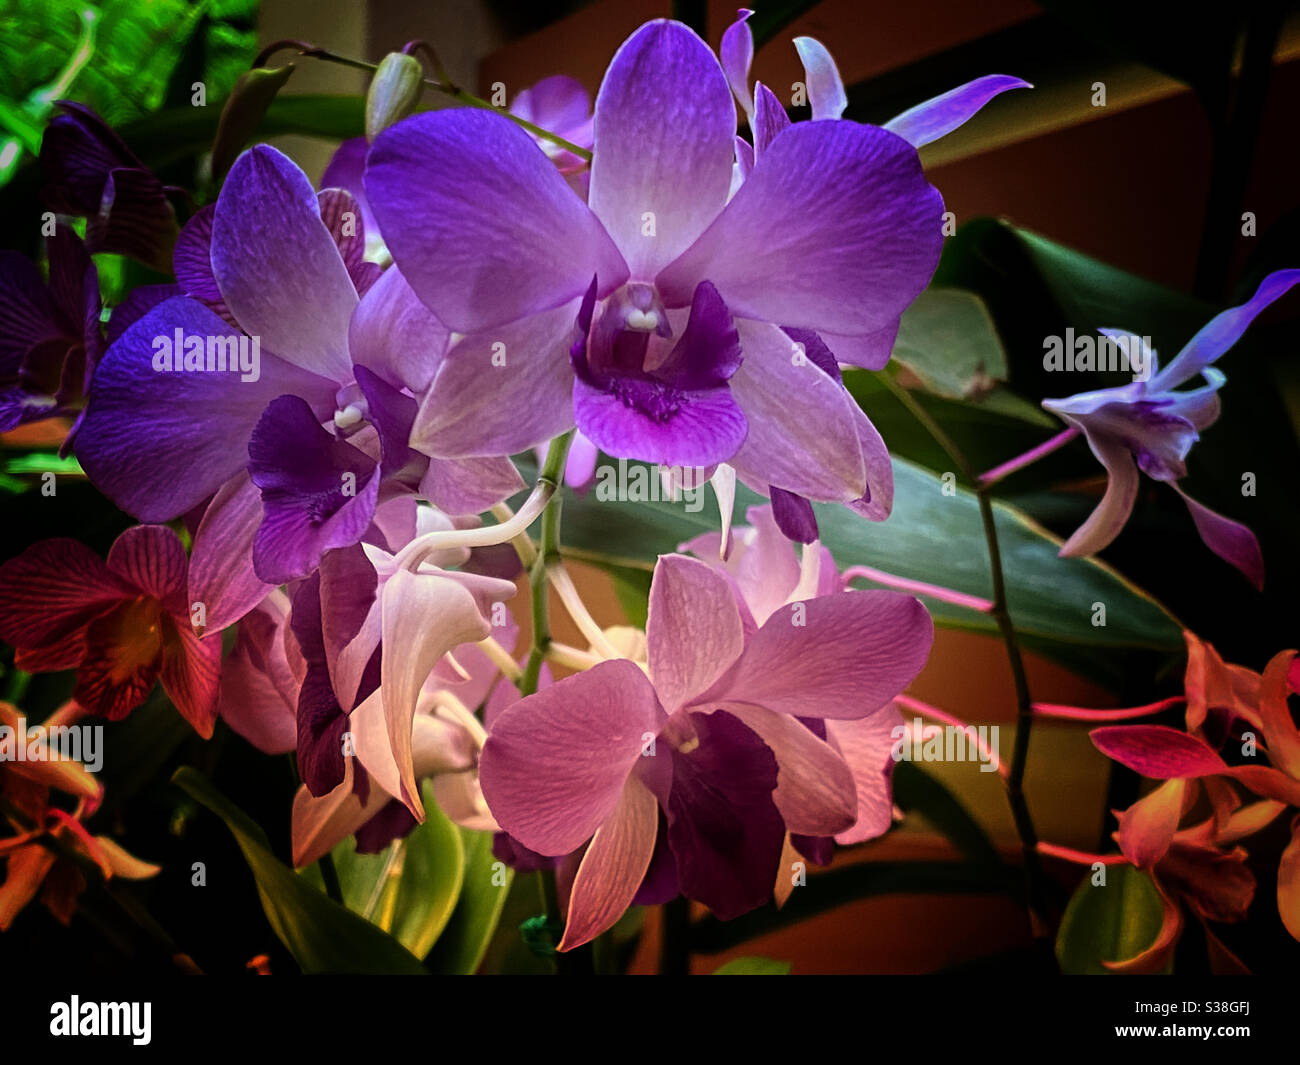 Purple and rose colored orchids Stock Photo